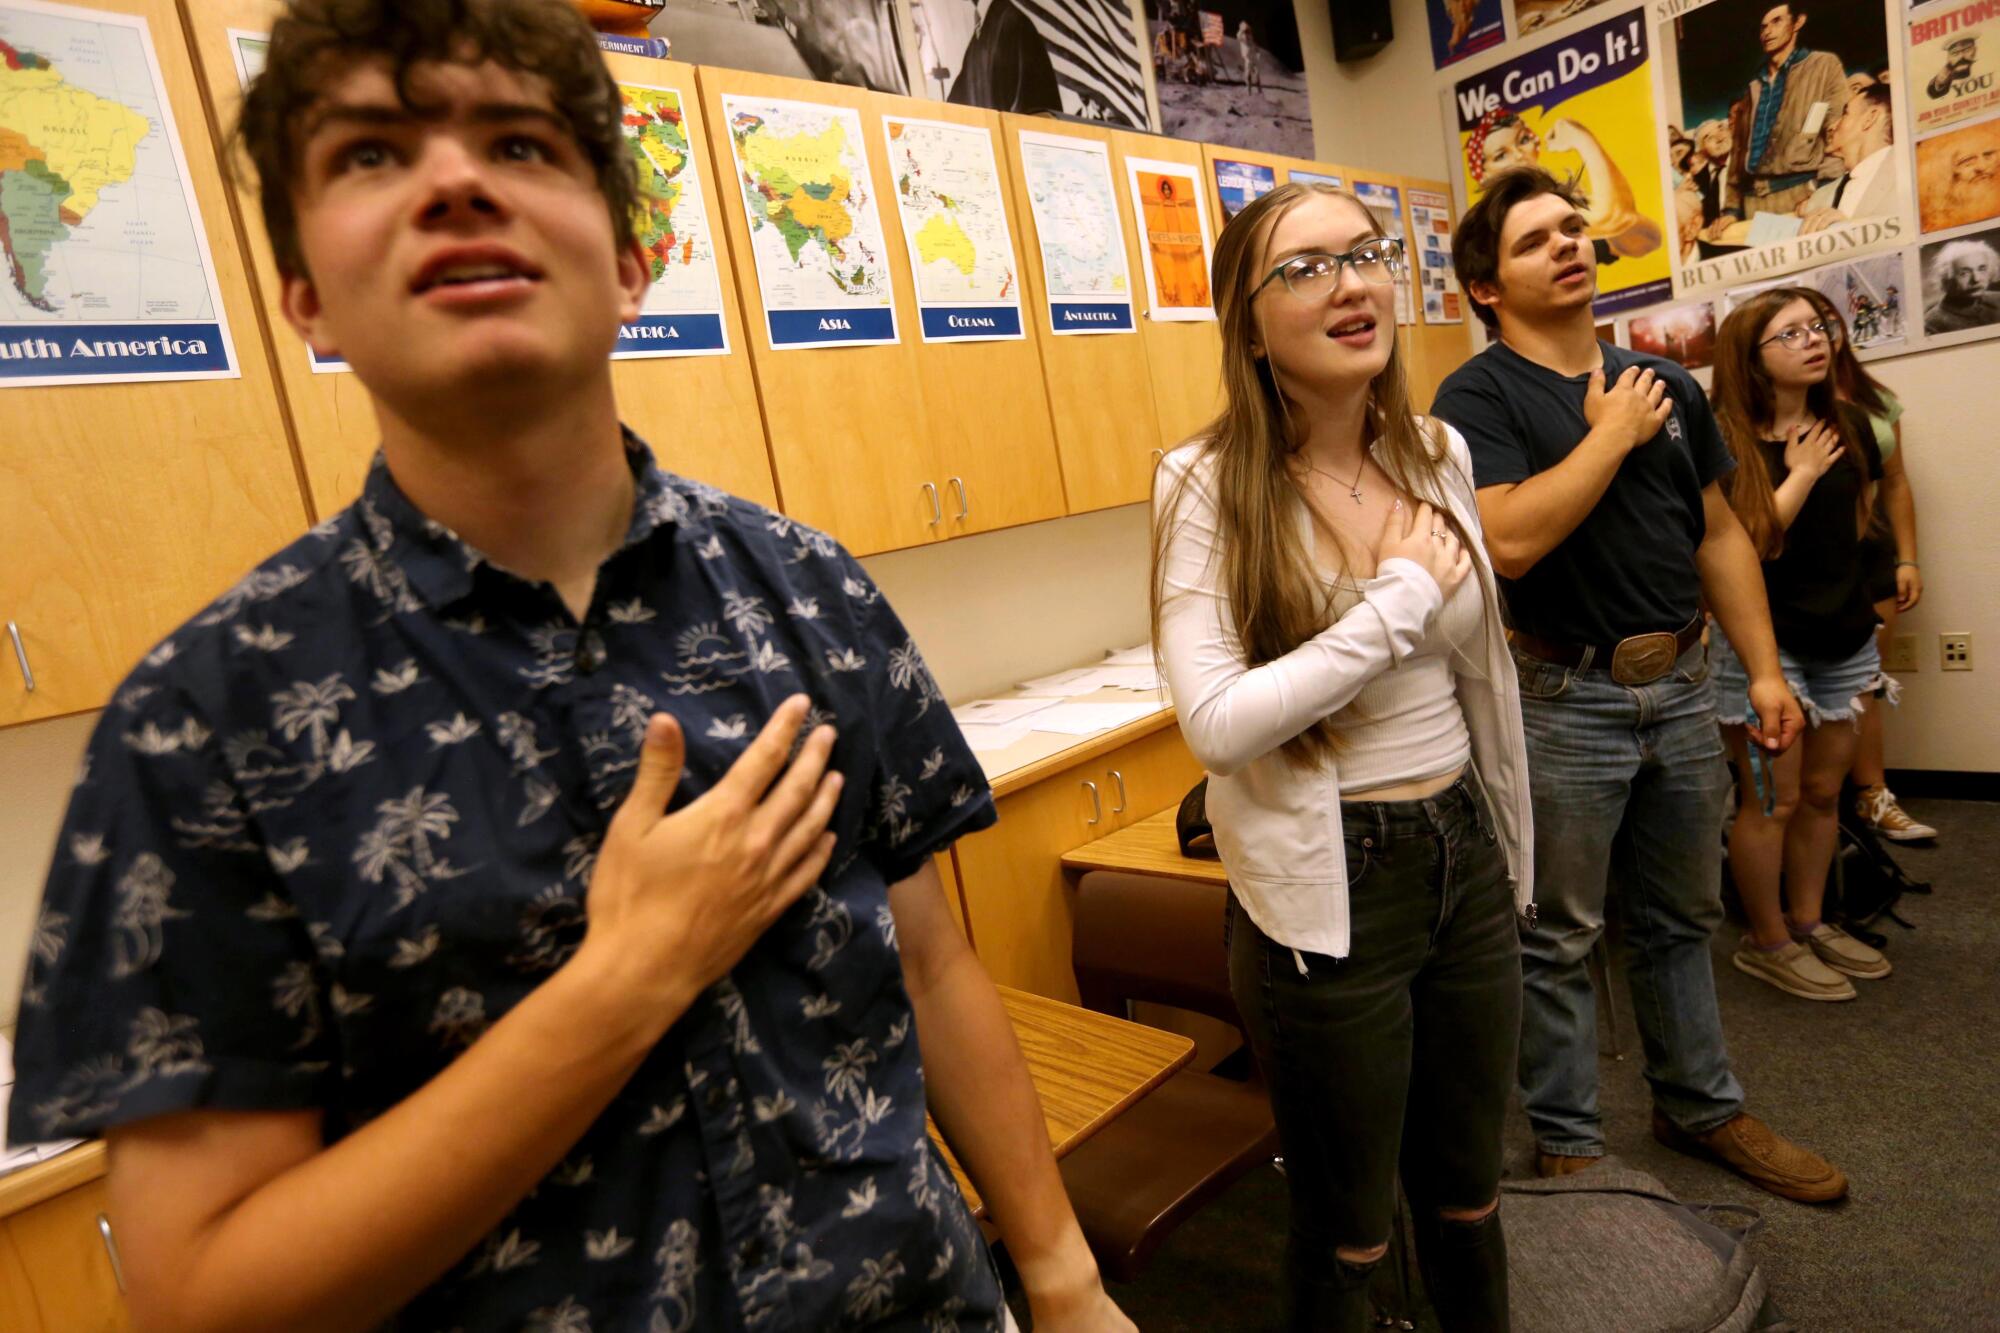 Students say the Pledge of Allegiance at the start of the school day in their economics class at Modoc High in Alturas.